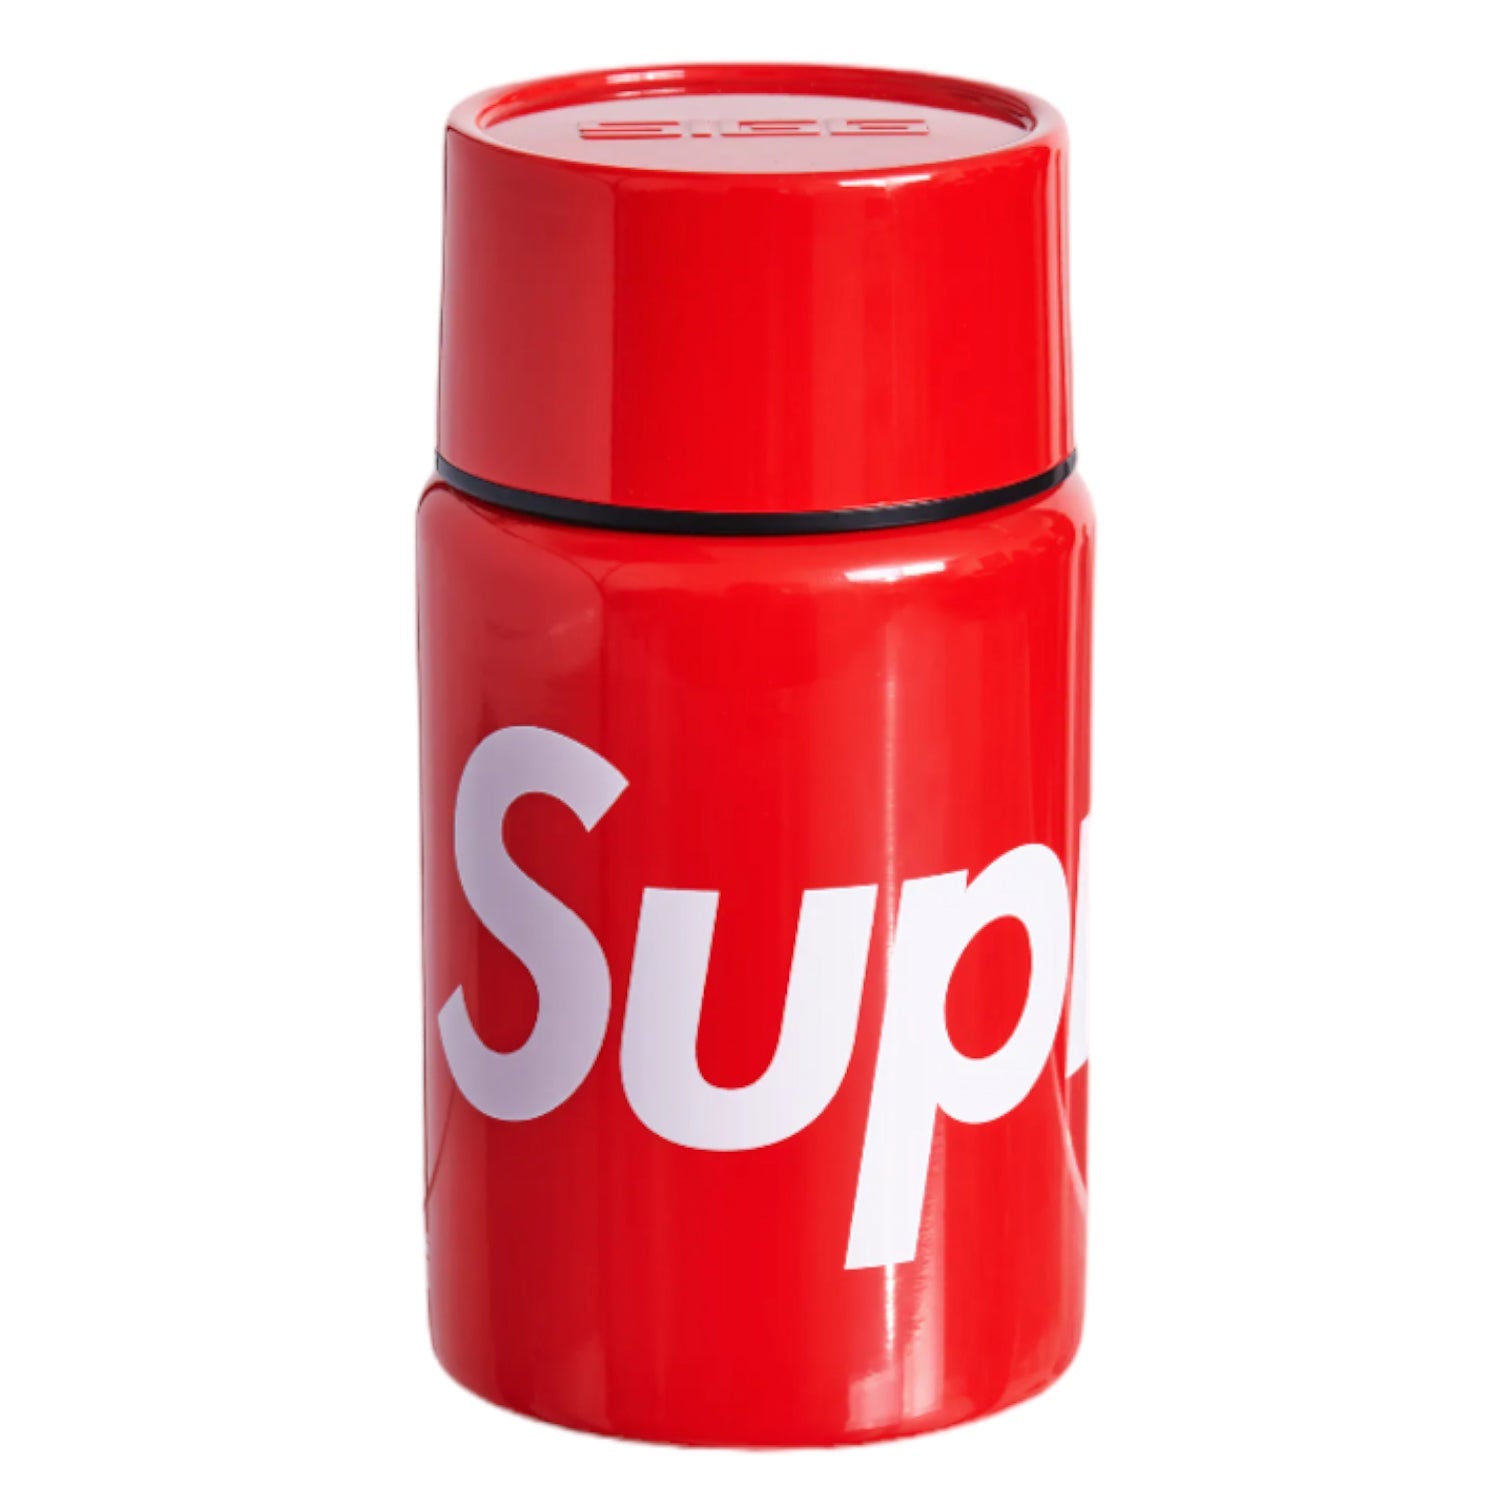 Supreme SIGG 0.75L Food Jar - Red Stainless Steel Container